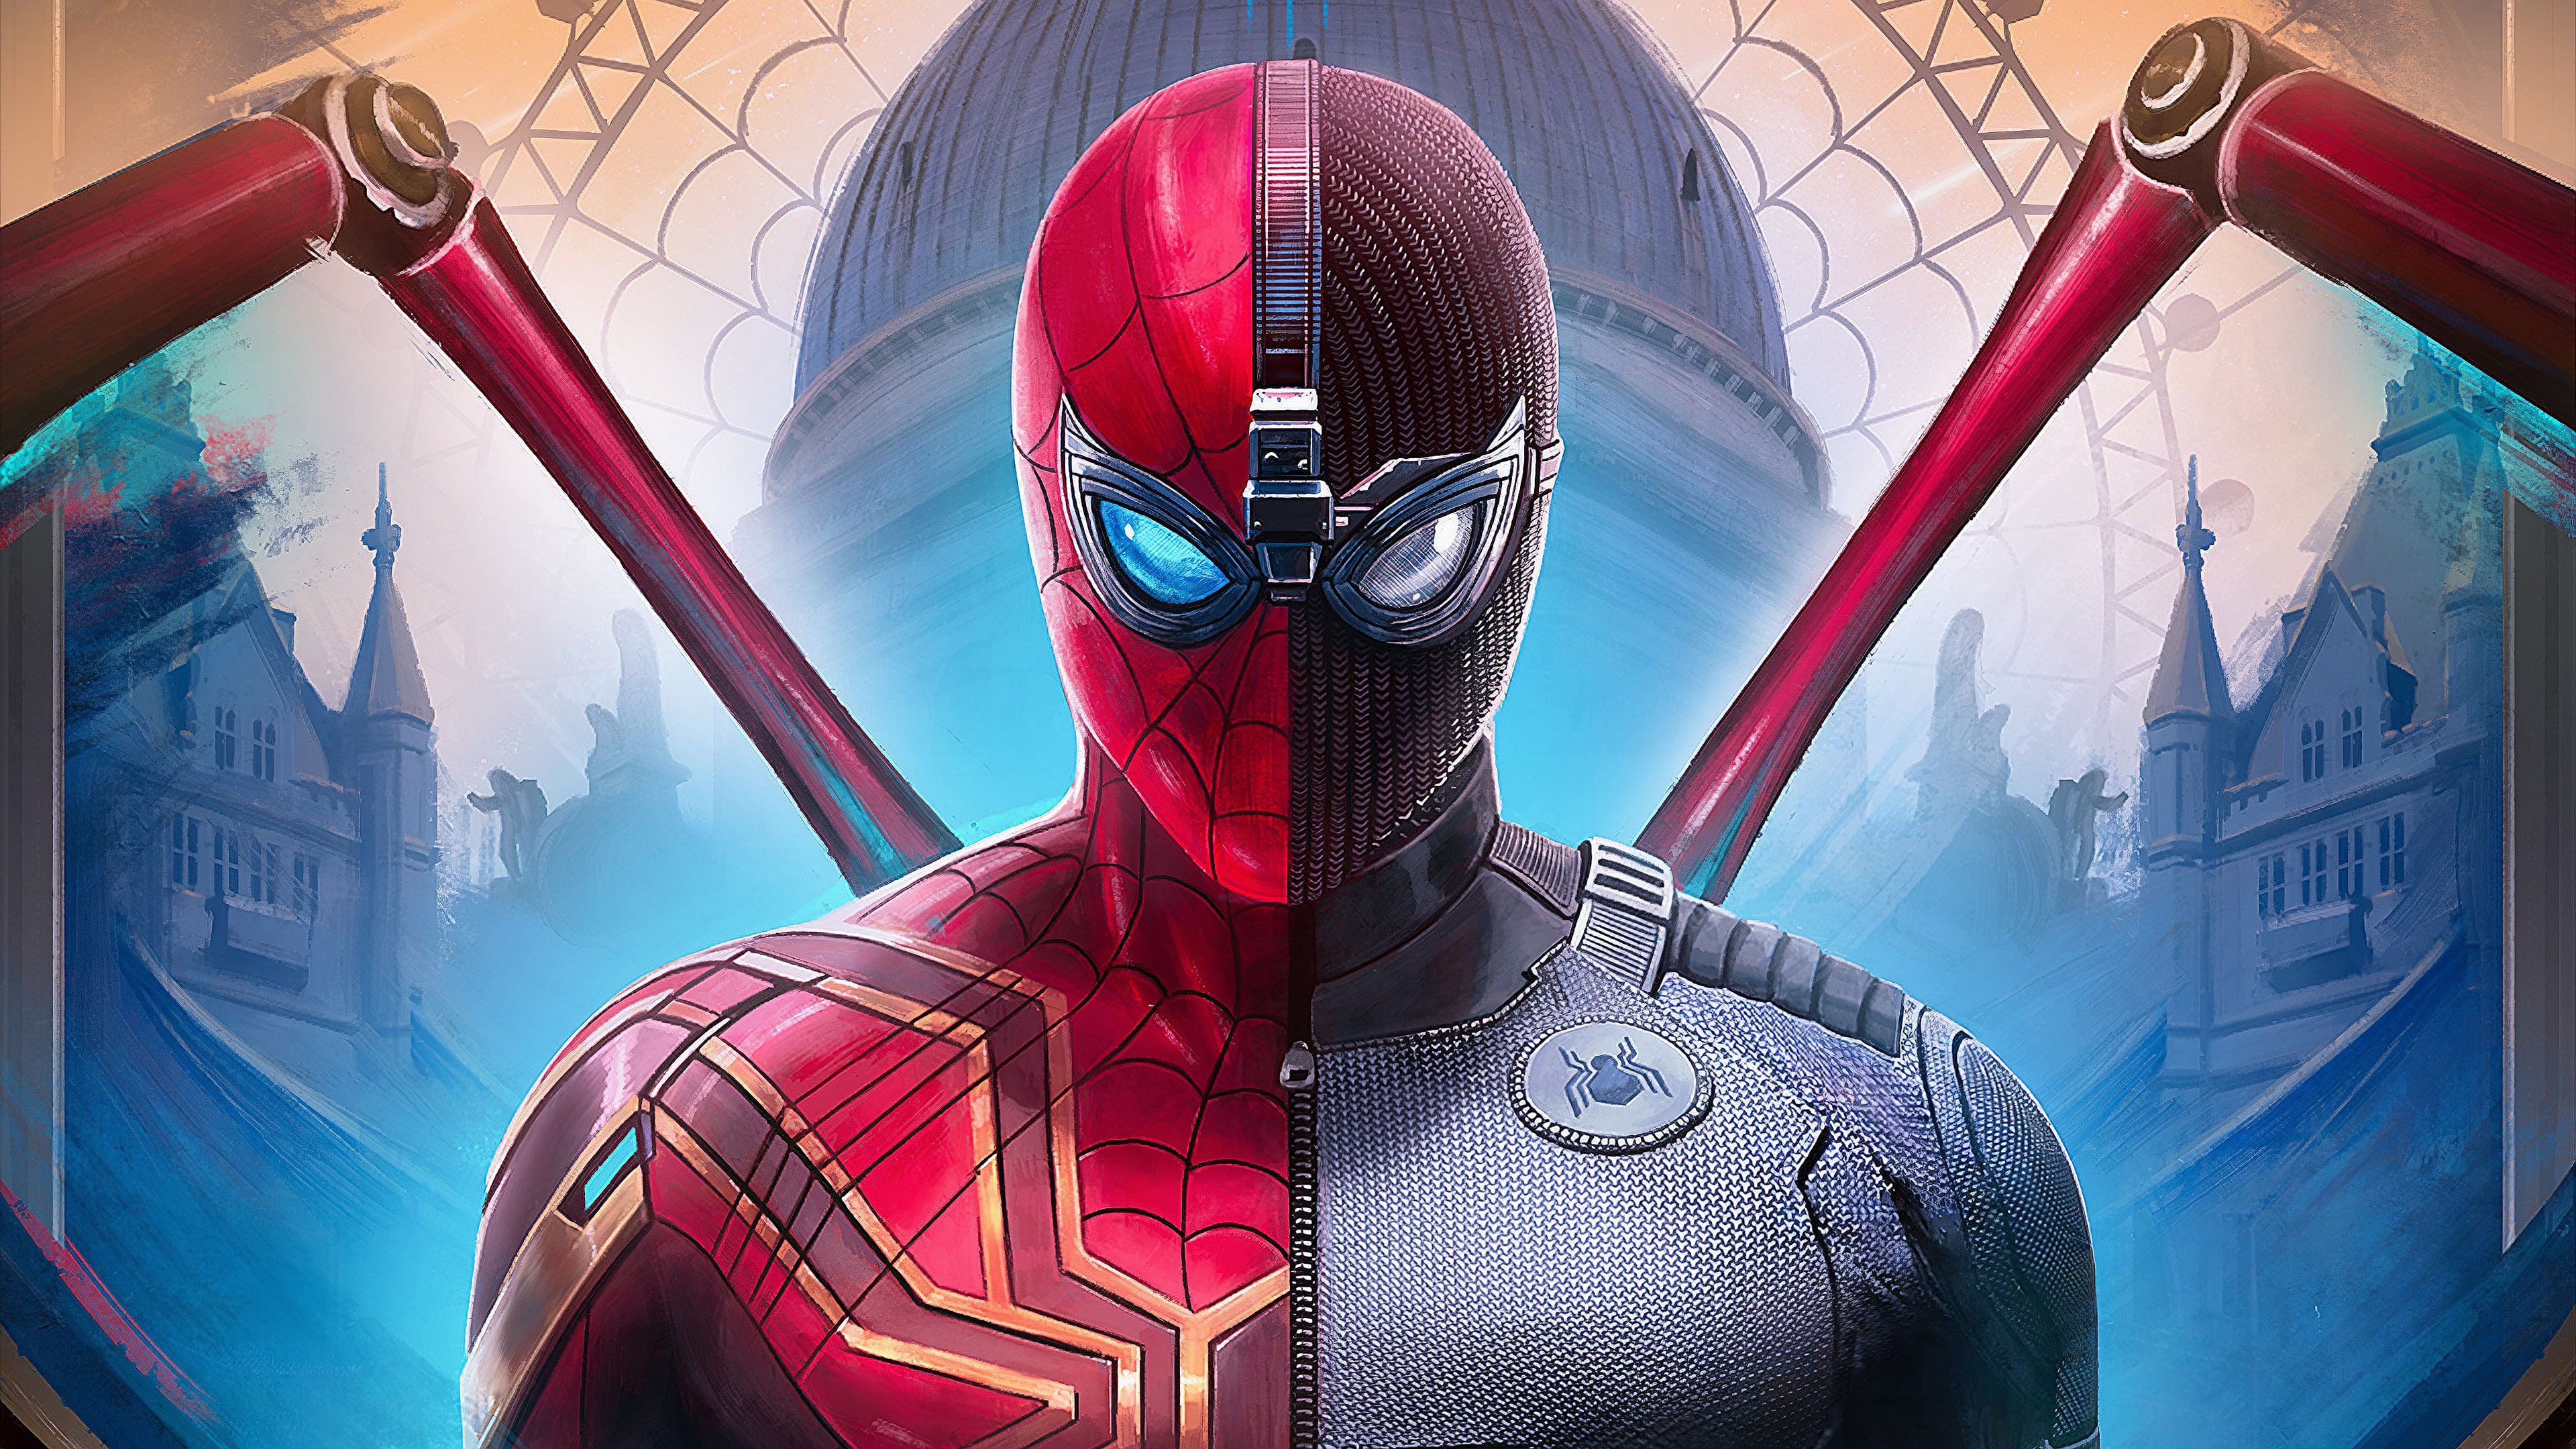 spider man far from home hd wallpapers 7wallpapers net spider man far from home hd wallpapers